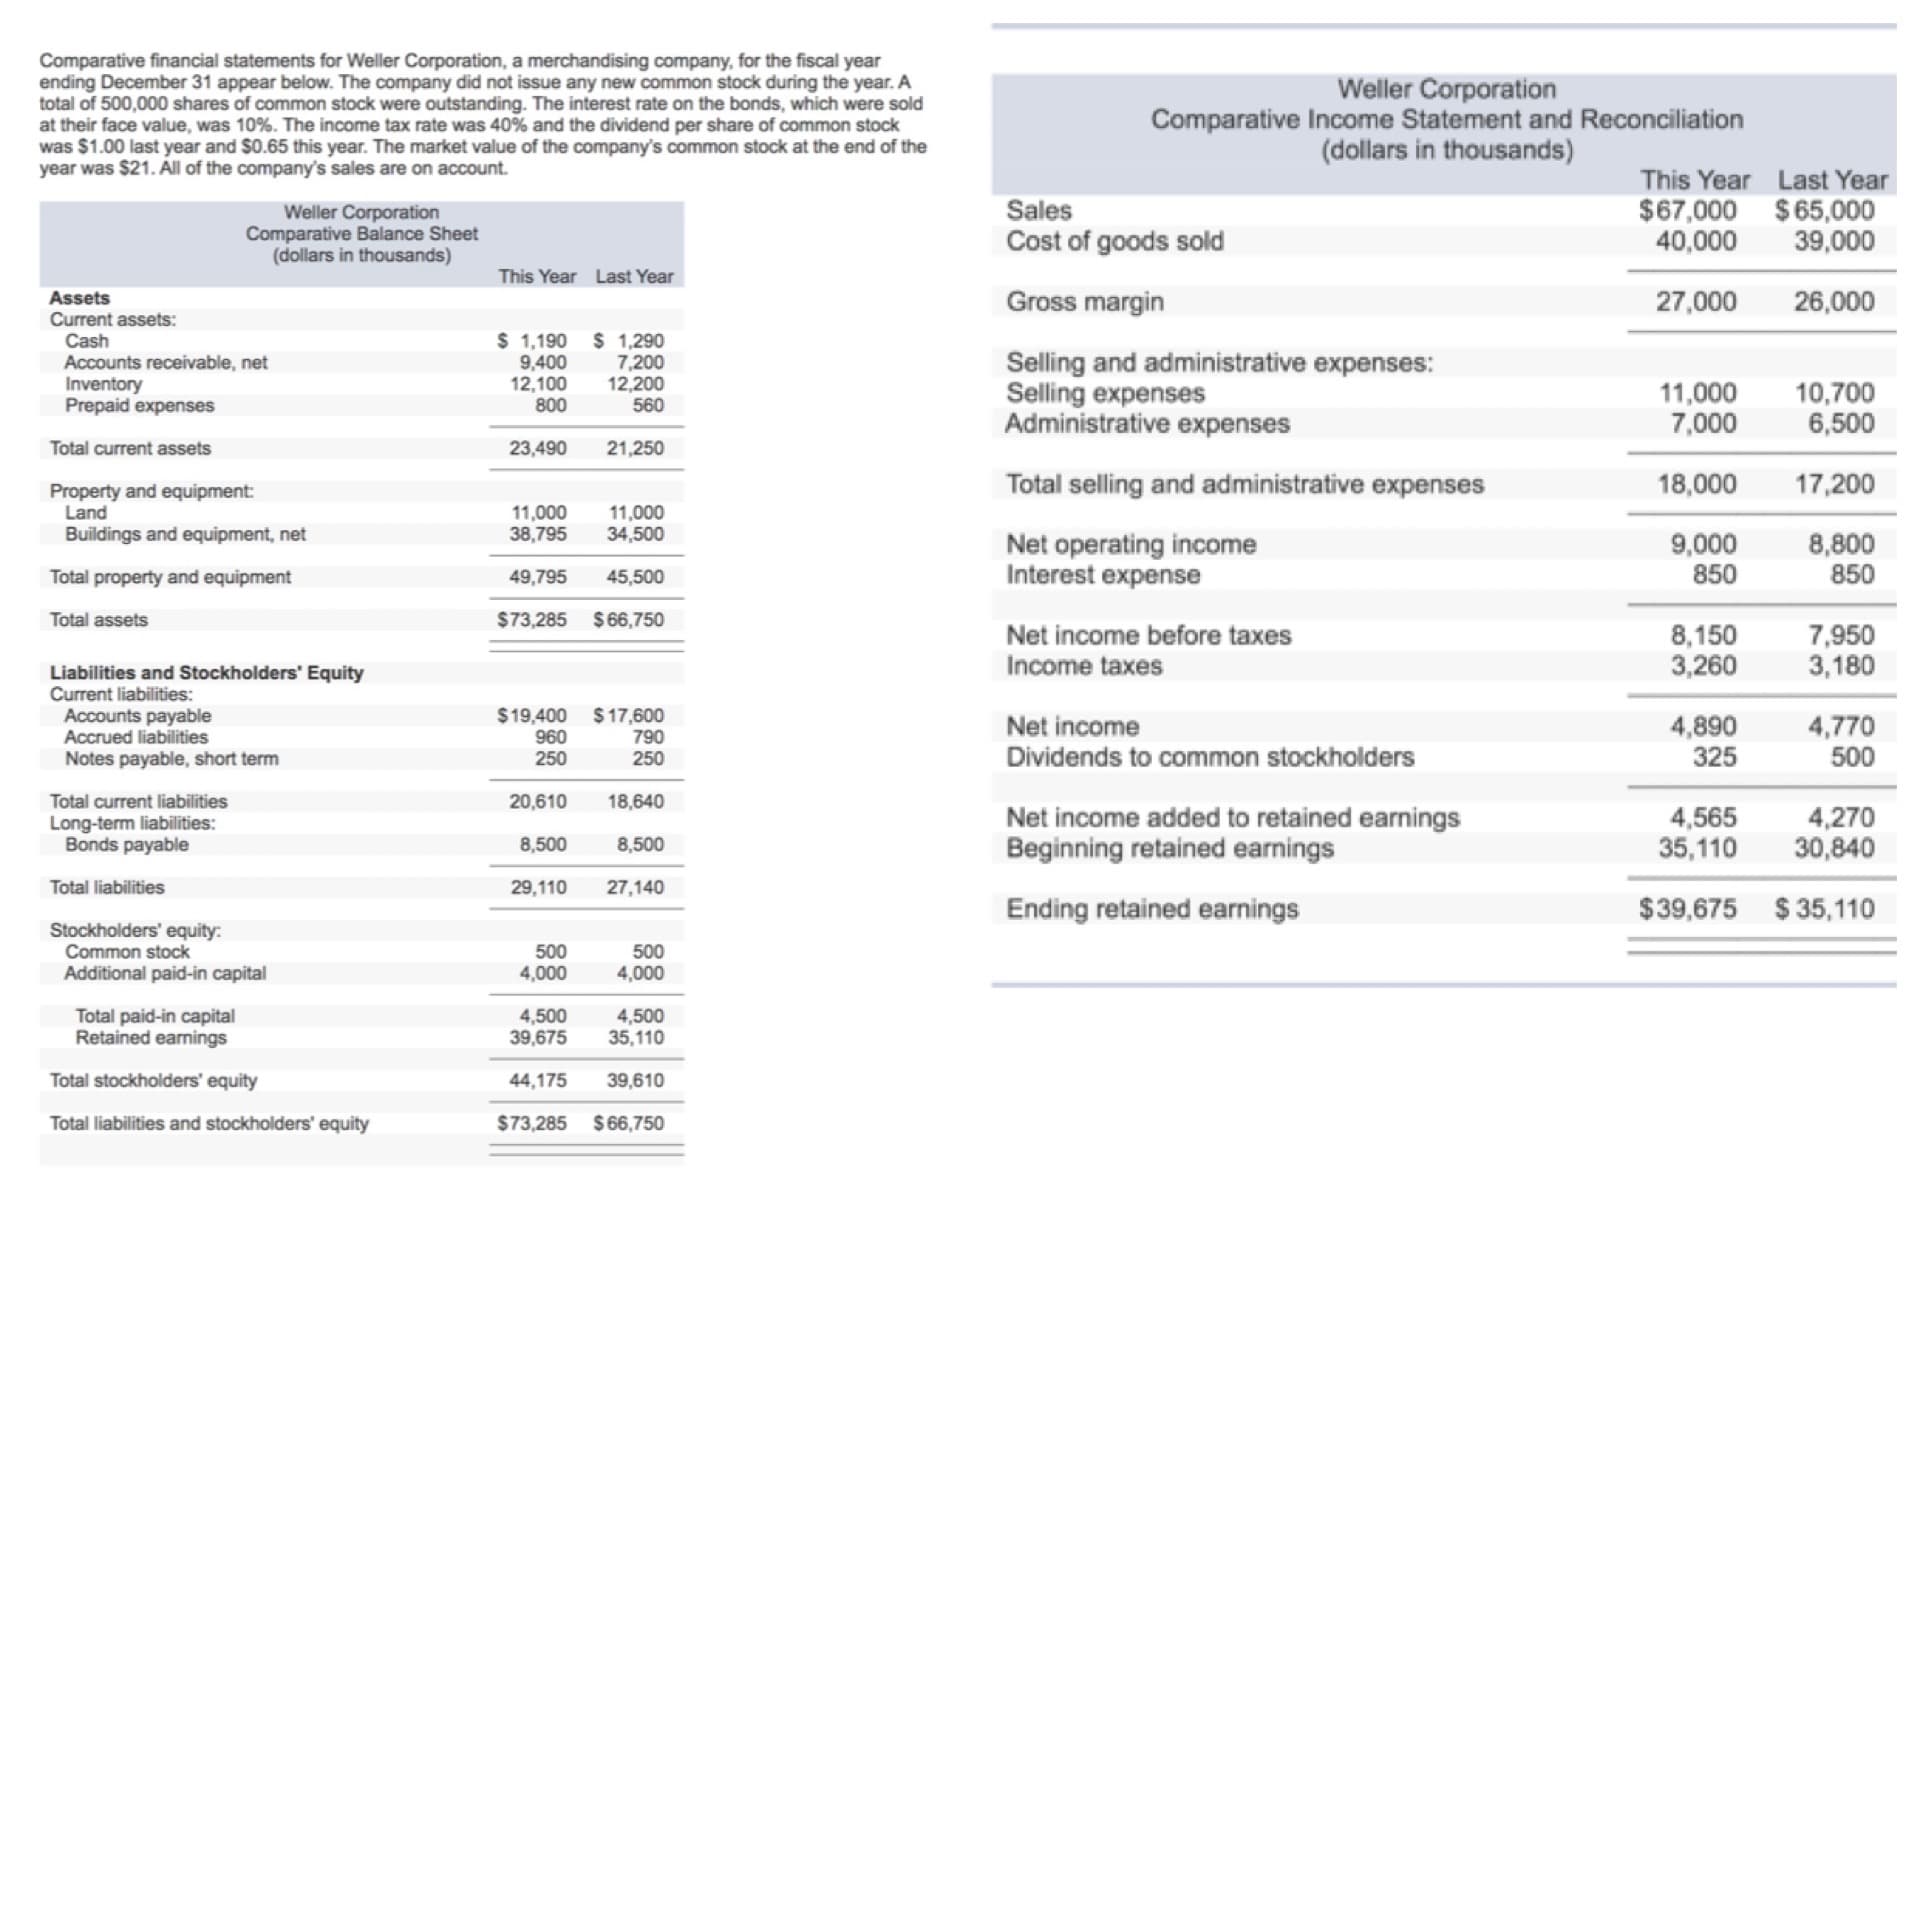 Comparative financial statements for Weller Corporation, a merchandising company, for the fiscal year
ending December 31 appear below. The company did not issue any new common stock during the year. A
total of 500,000 shares of common stock were outstanding. The interest rate on the bonds, which were sold
at their face value, was 10%. The income tax rate was 40% and the dividend per share of common stock
was $1.00 last year and $0.65 this year. The market value of the company's common stock at the end of the
year was $21. All of the company's sales are on account.
Weller Corporation
Comparative Income Statement and Reconciliation
(dollars in thousands)
This Year Last Year
Sales
Weller Corporation
Comparative Balance Sheet
(dollars in thousands)
$67,000 $65,000
40,000
Cost of goods sold
39,000
This Year Last Year
27,000
26,000
Assets
Current assets:
Cash
Accounts receivable, net
Inventory
Prepaid expenses
Gross margin
$ 1,190
9,400
12,100
800
$ 1,290
7,200
12,200
560
Selling and administrative expenses:
Selling expenses
Administrative expenses
11,000
7,000
10,700
6,500
Total current assets
23,490
21,250
Total selling and administrative expenses
18,000
17,200
Property and equipment:
Land
Buildings and equipment, net
11,000
38,795
11,000
34,500
Net operating income
Interest expense
9,000
850
8,800
850
Total property and equipment
49,795
45,500
